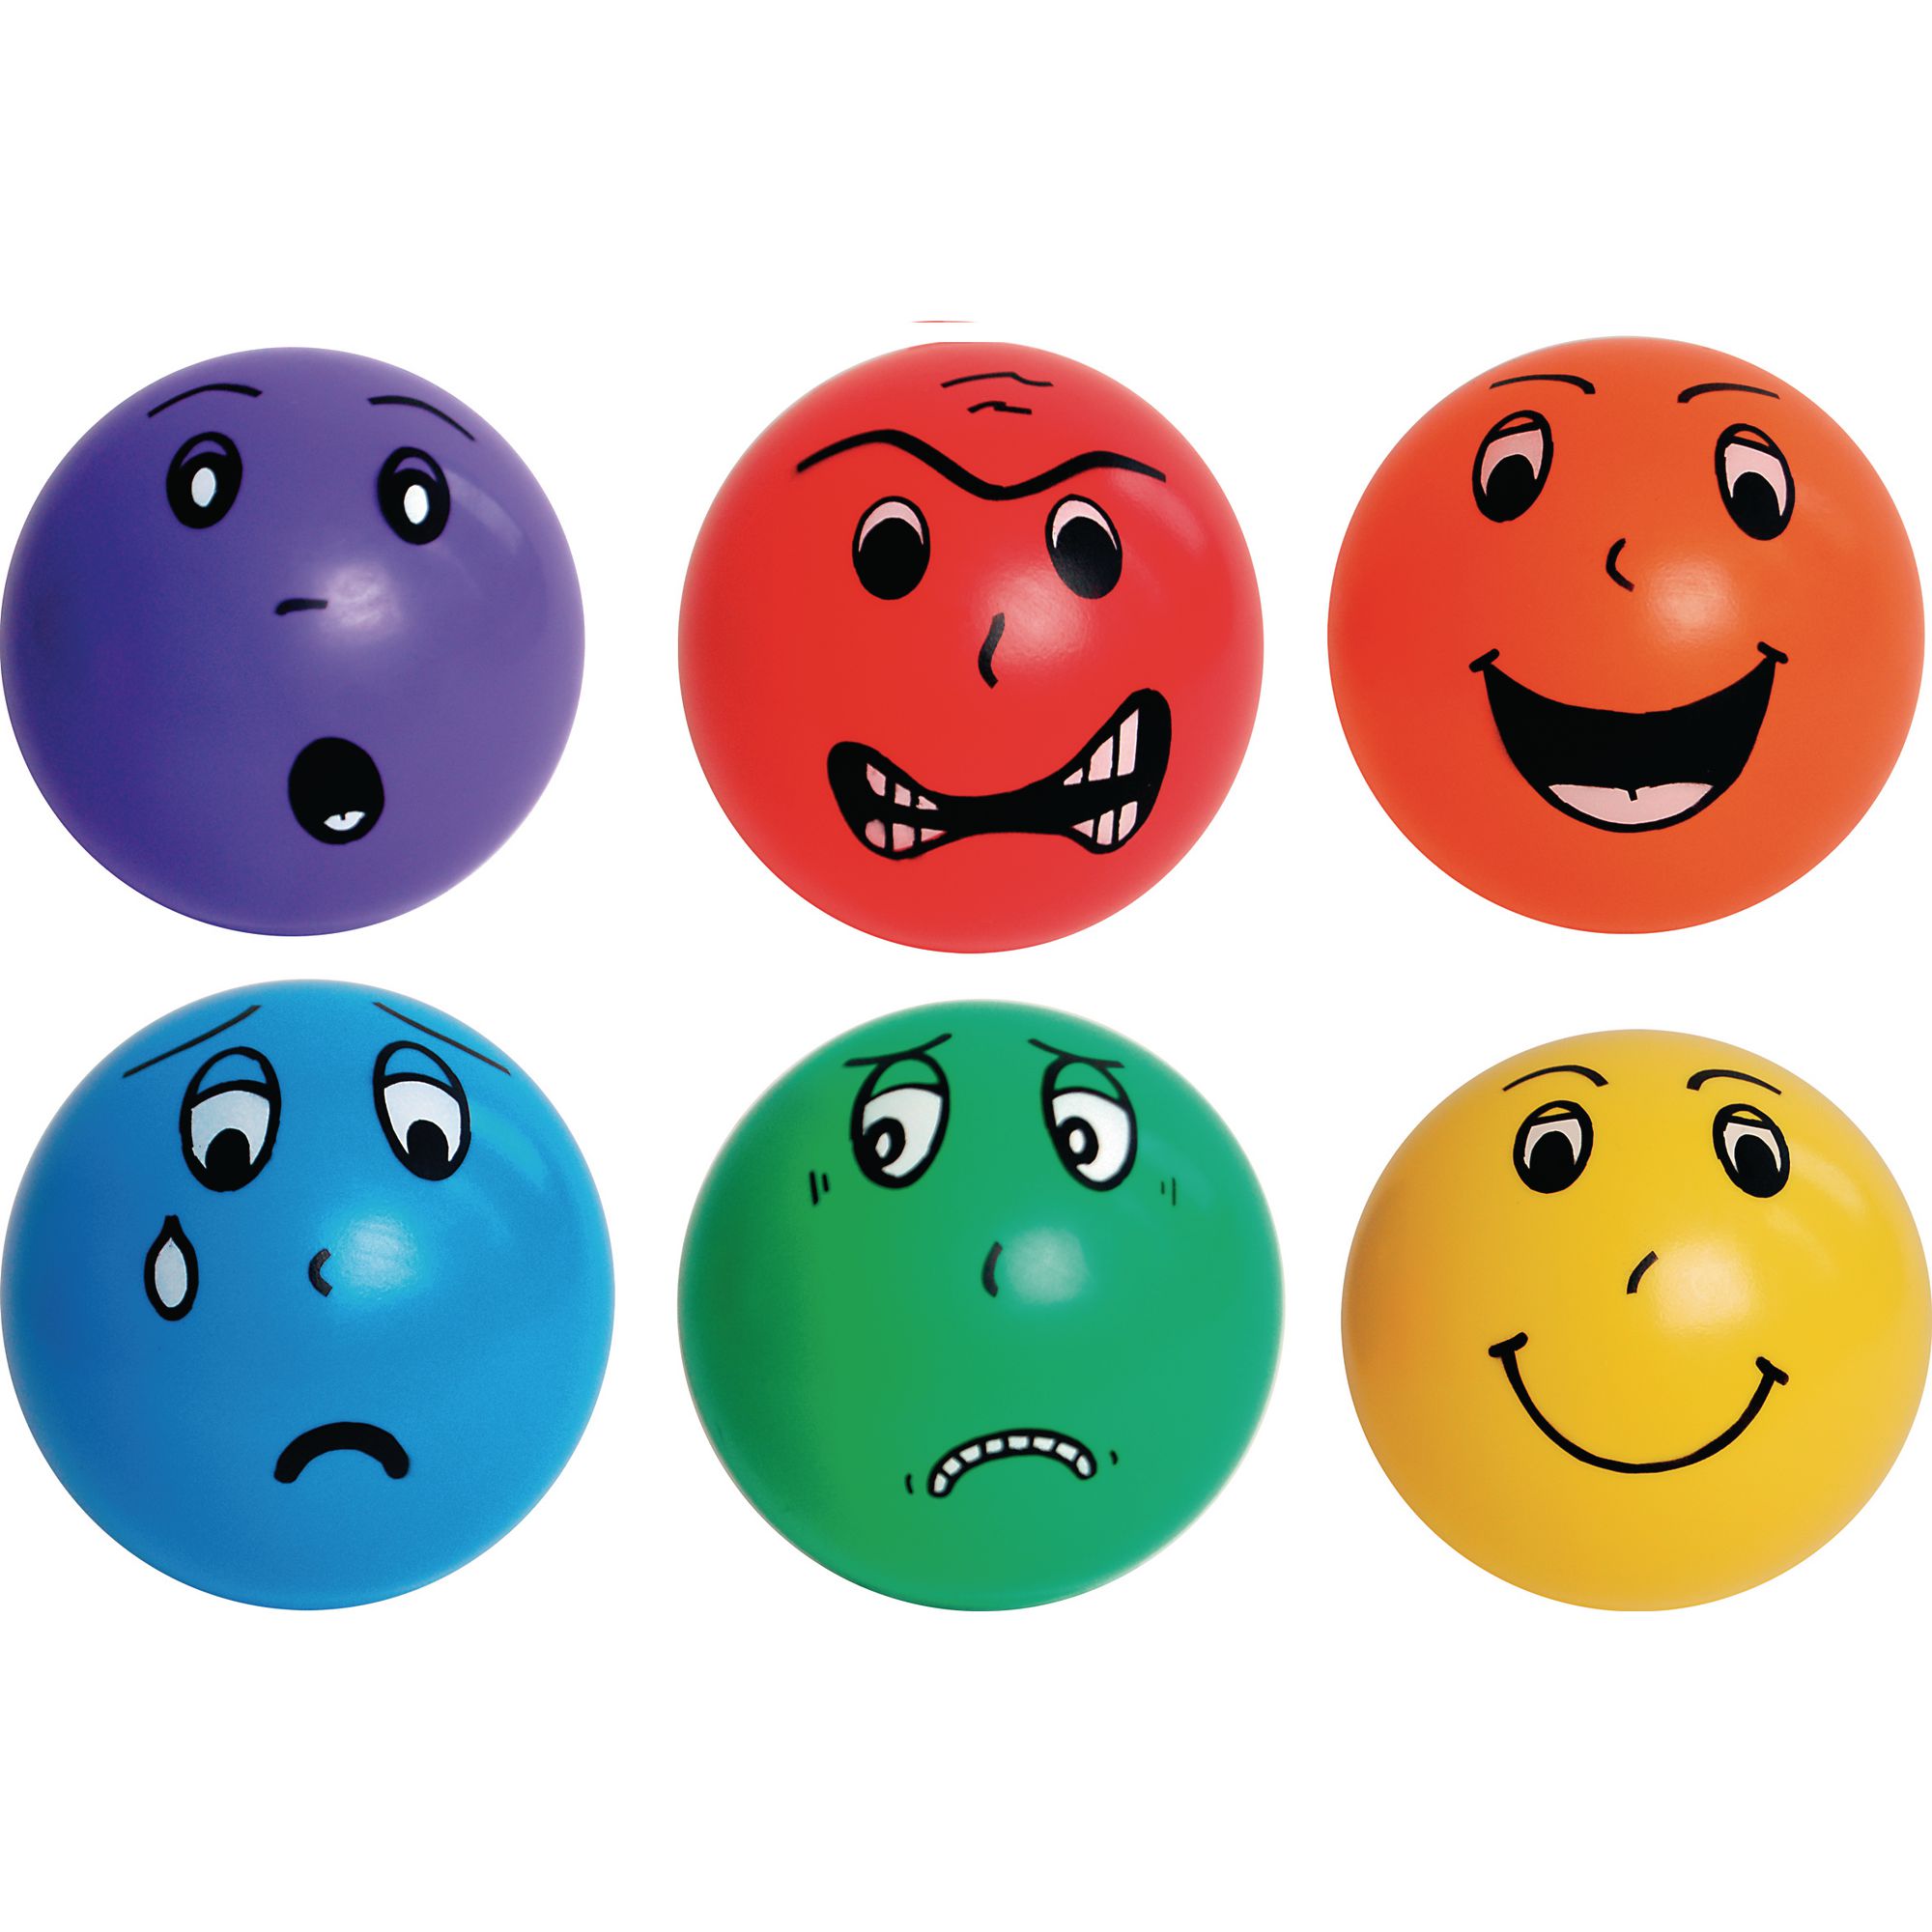 Emotion Face Balls - Pack of 6 - PPEP07361 | Davies Sports